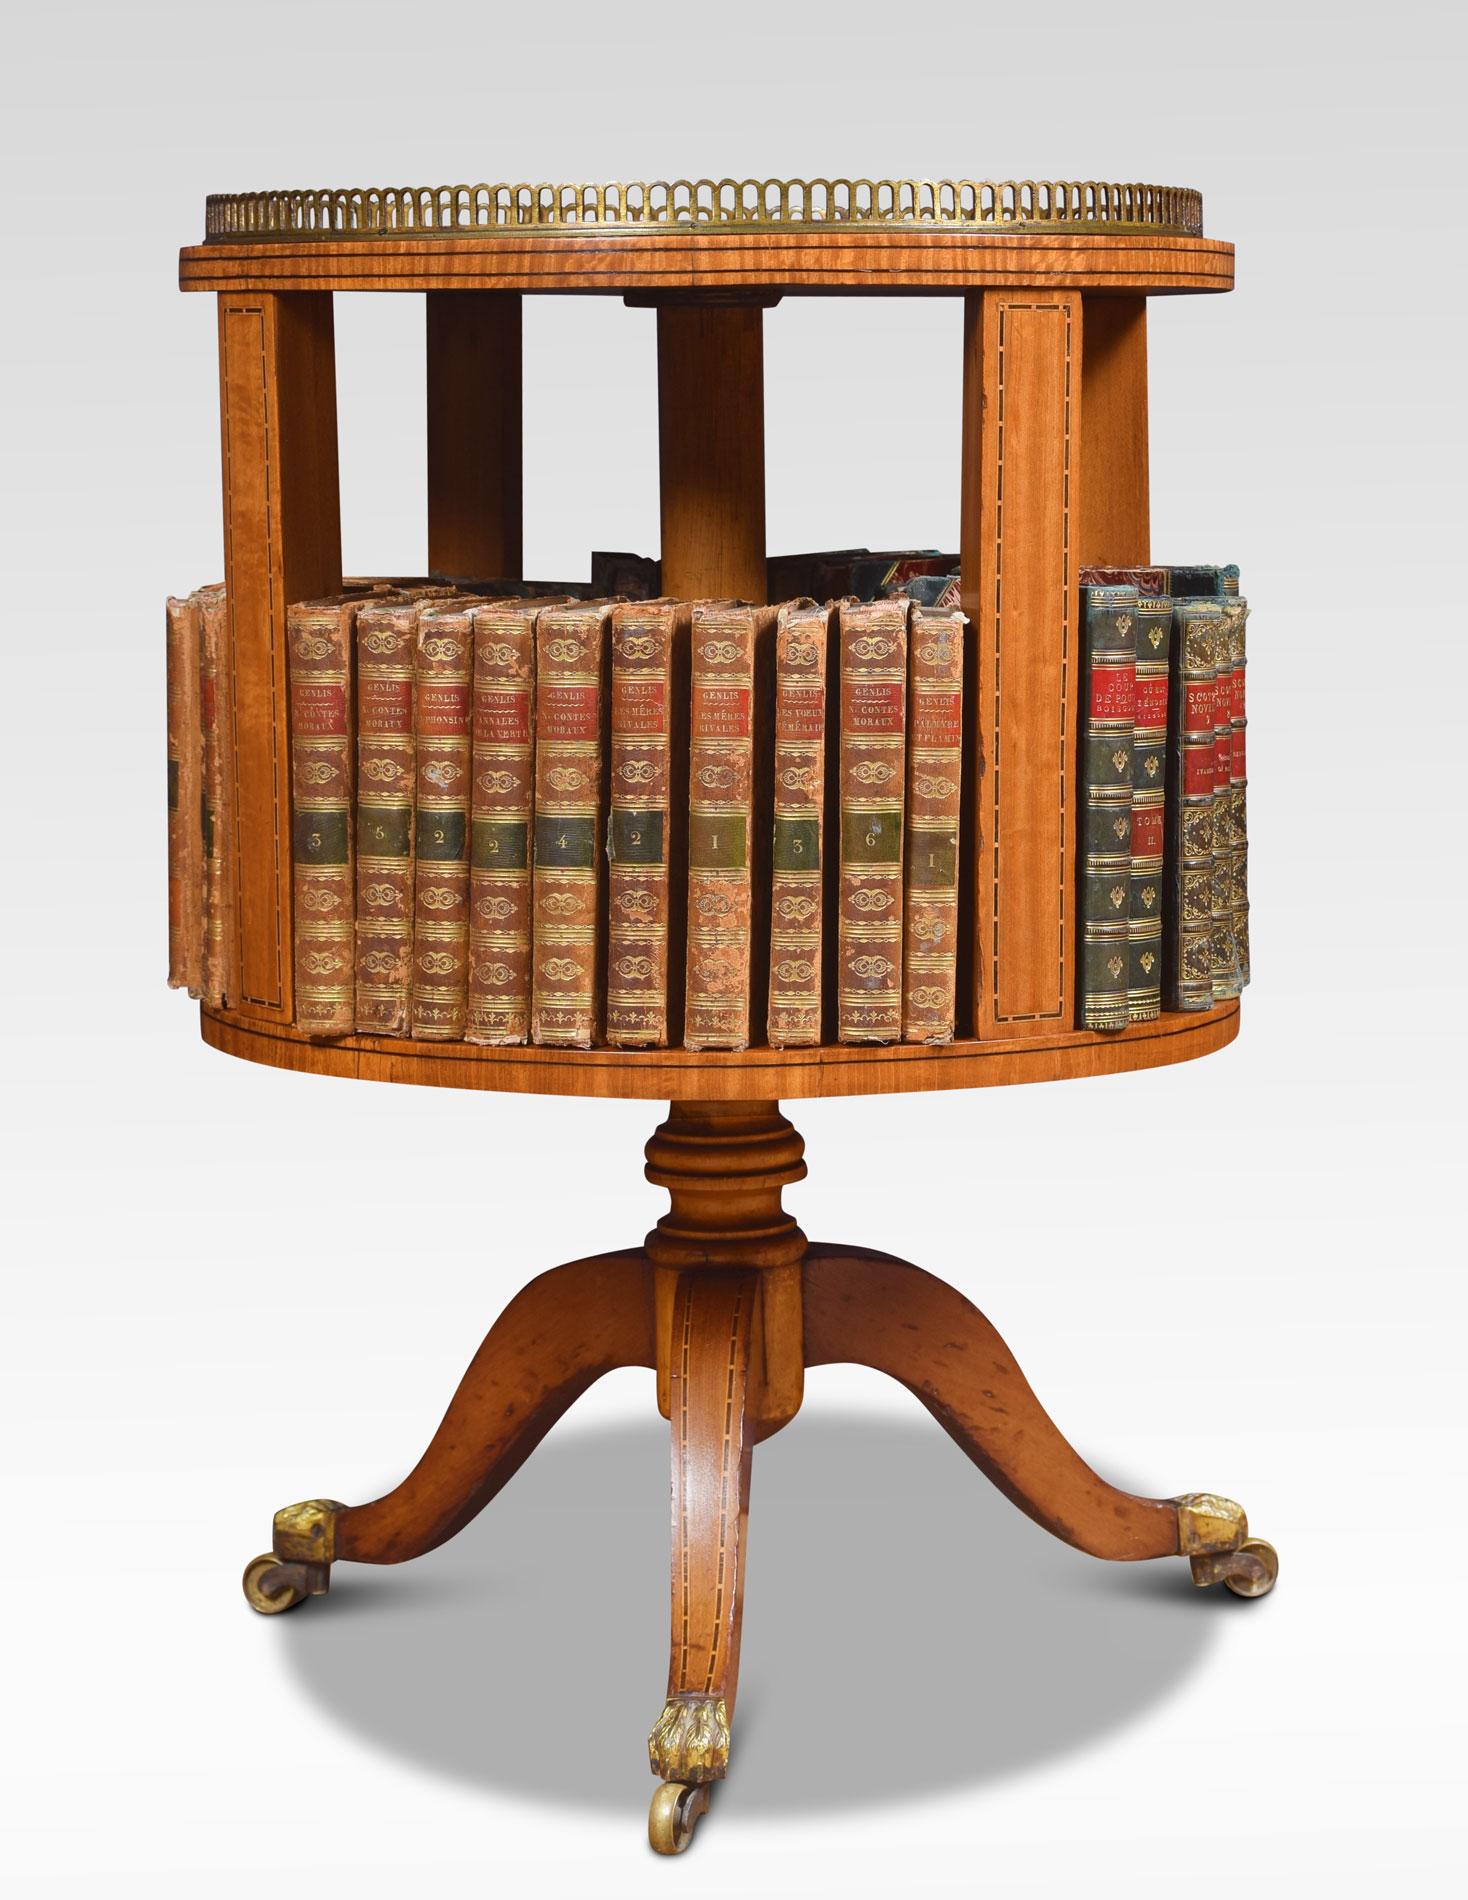 Edwardian satinwood and string inlaid revolving bookcase with circular top and raised pierced brass gallery above book divisions supported on a ring turned stem and down swept legs, fitted with brass paw feet and casters.
Dimensions
Height 26.5